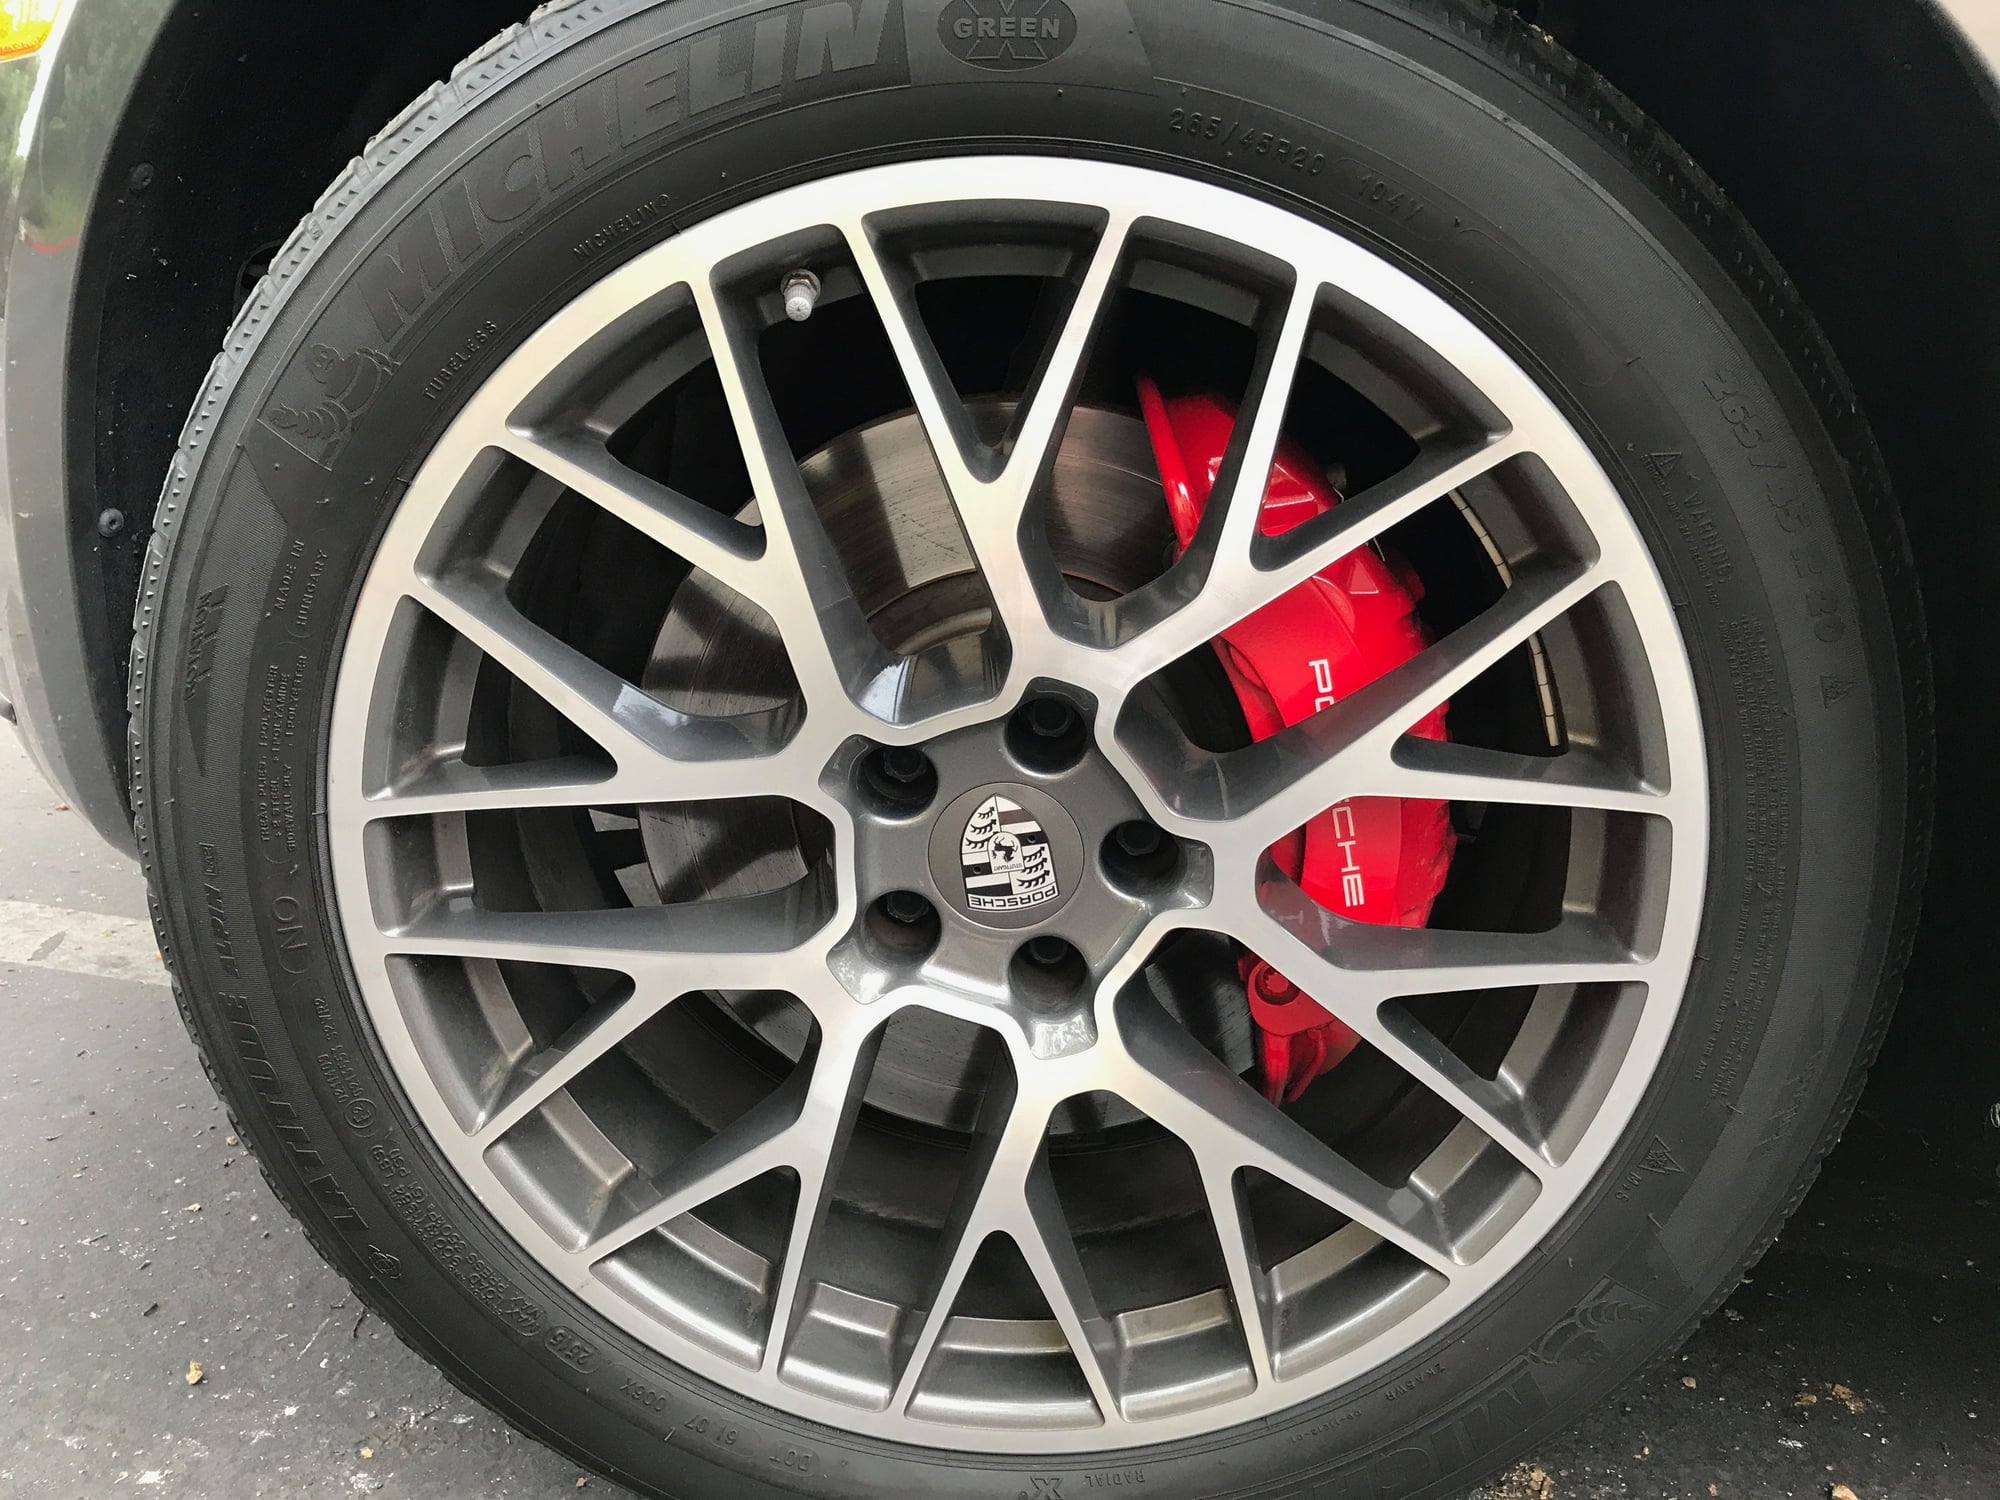 Wheels and Tires/Axles - Set of 20" Turbo Spyder Wheels off my 2015 Macan Turbo - Like new - Used - Culver City, CA 90230, United States